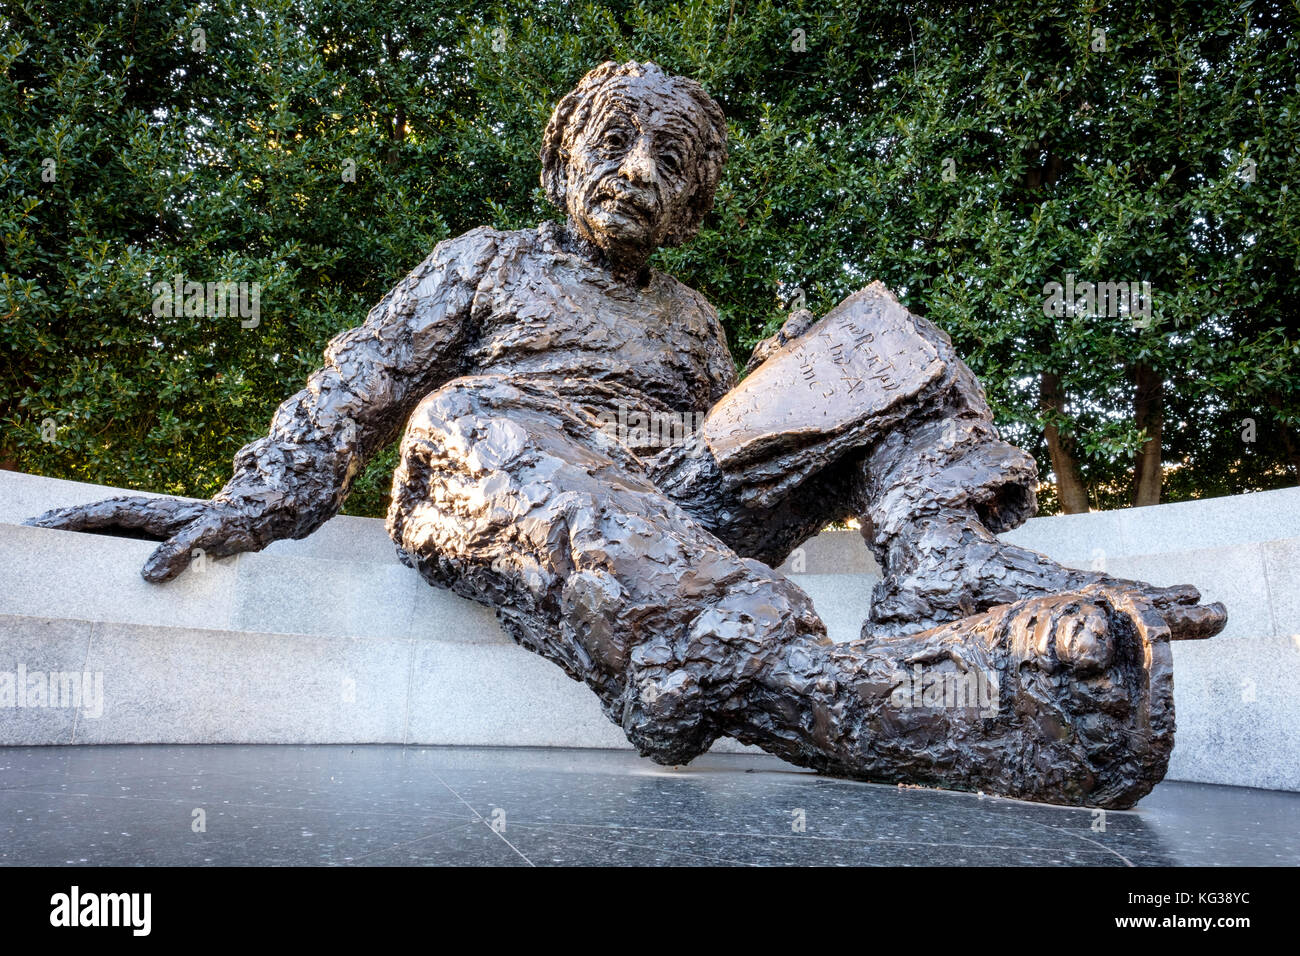 Albert Einstein Memorial at the National Academy of Sciences, Washington, DC, United States of America, USA. Stock Photo